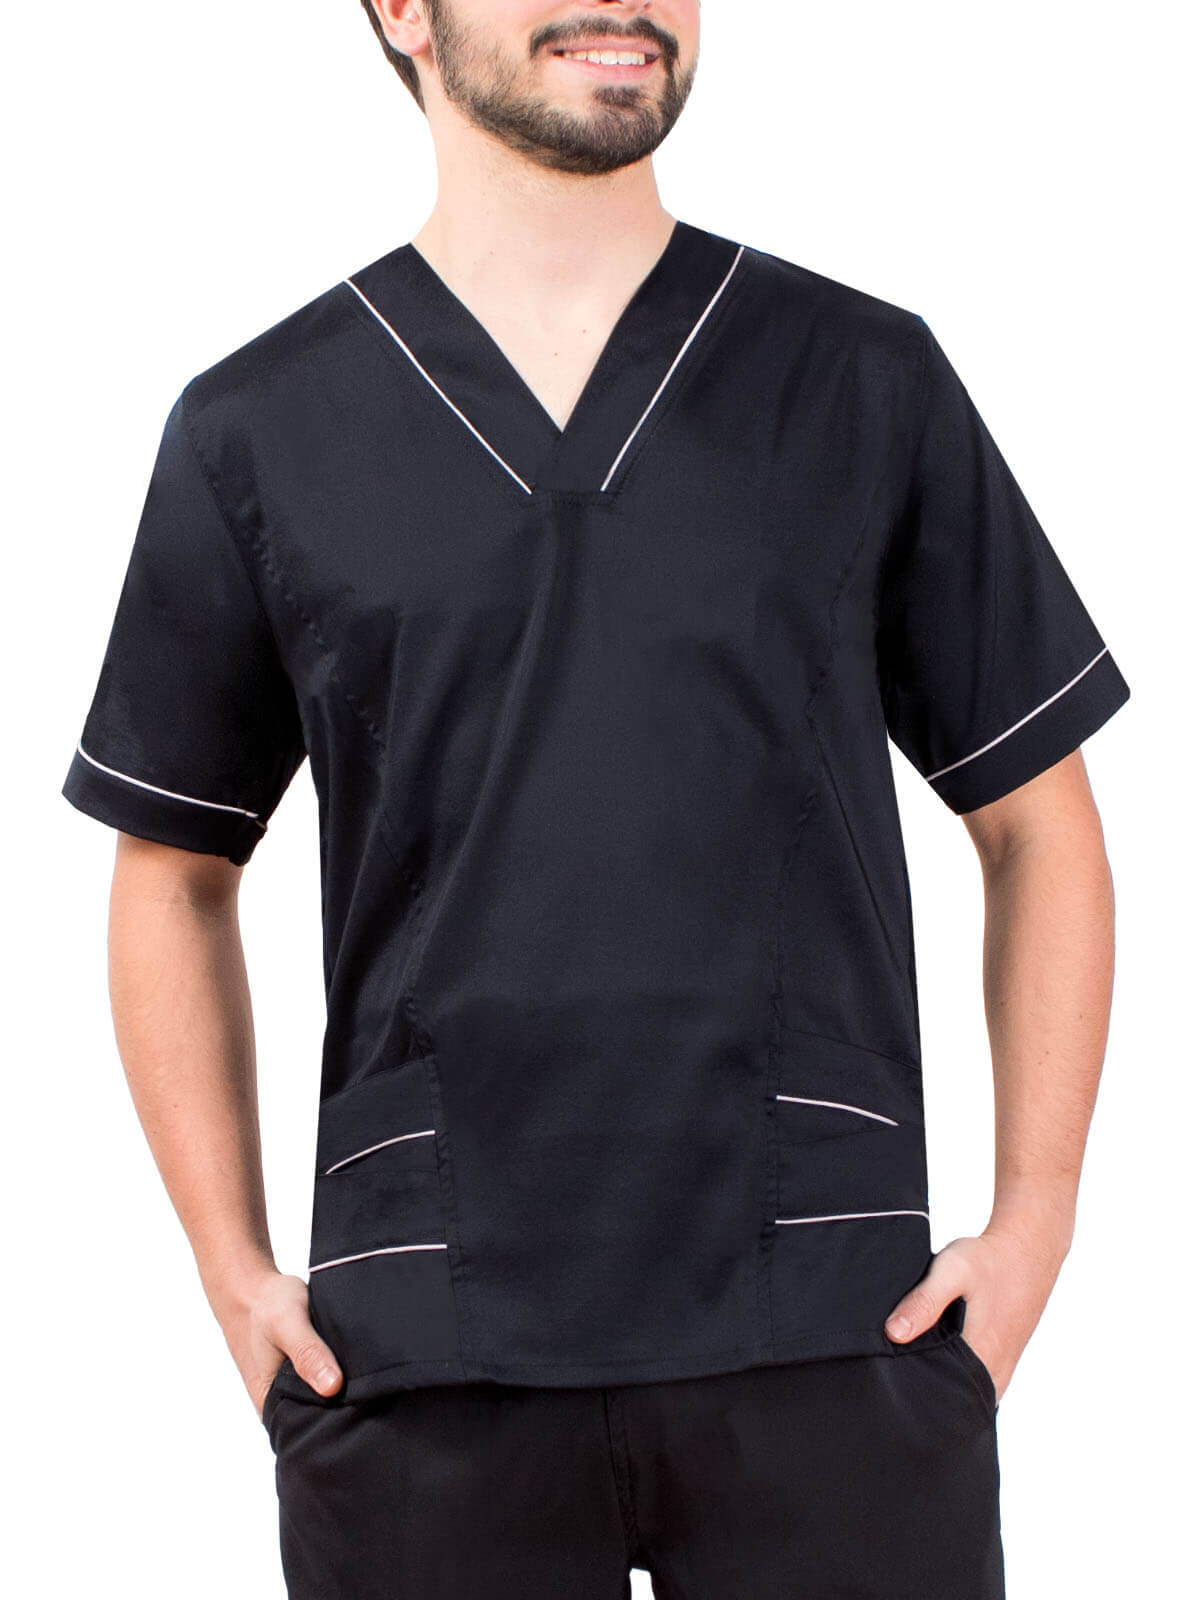 Embroidered Scrub Tops